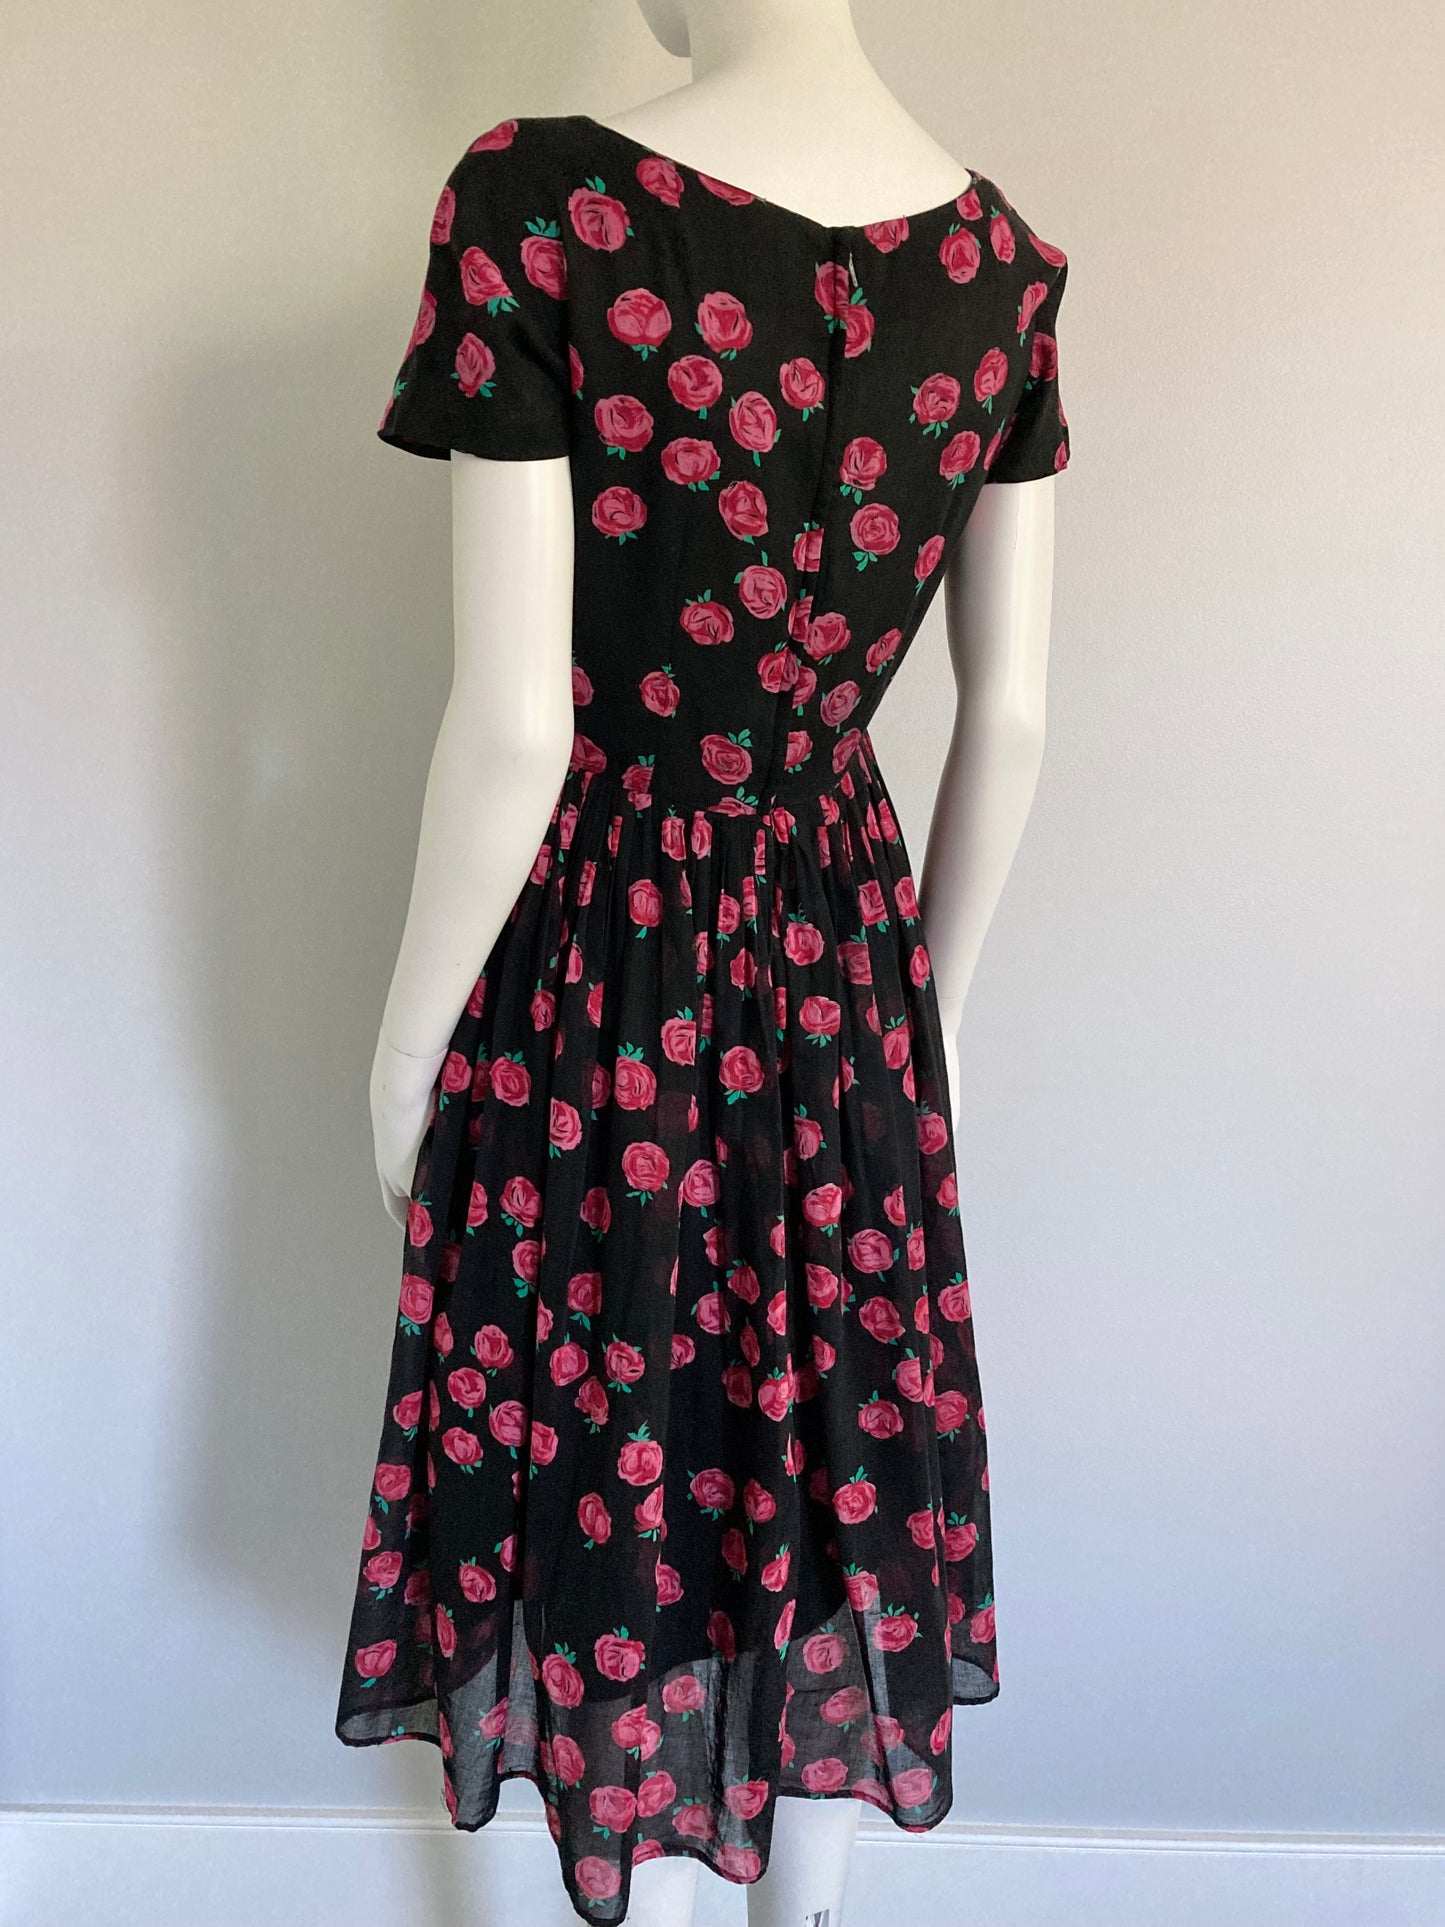 1950s Cotton Fit and Flare Dress, Size M, Black with Roses